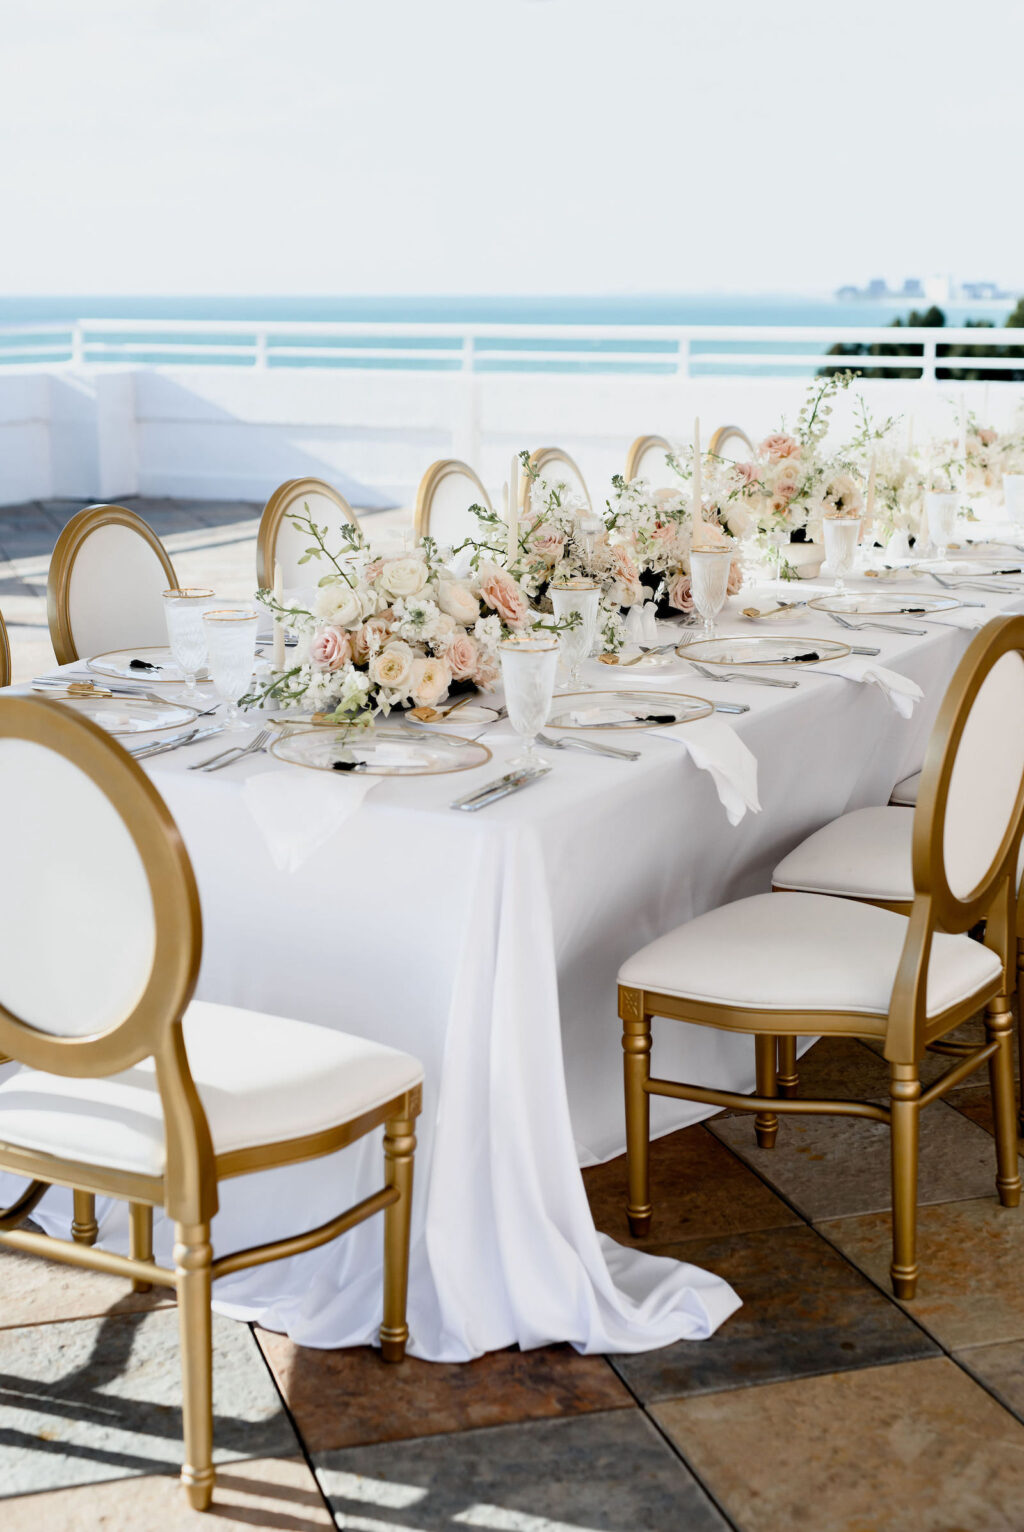 Elegant Classic Waterfront Rooftop Wedding Reception Decor, Long Feasting Table with Gold and White Dining Chairs, Low Floral Centerpieces and White Linens | Tampa Bay Wedding Planner Elegant Affairs by Design | Wedding Rentals Kate Ryan Event Rentals | Historic Pink Palace St. Pete Wedding Venue The Don CeSar Hotel